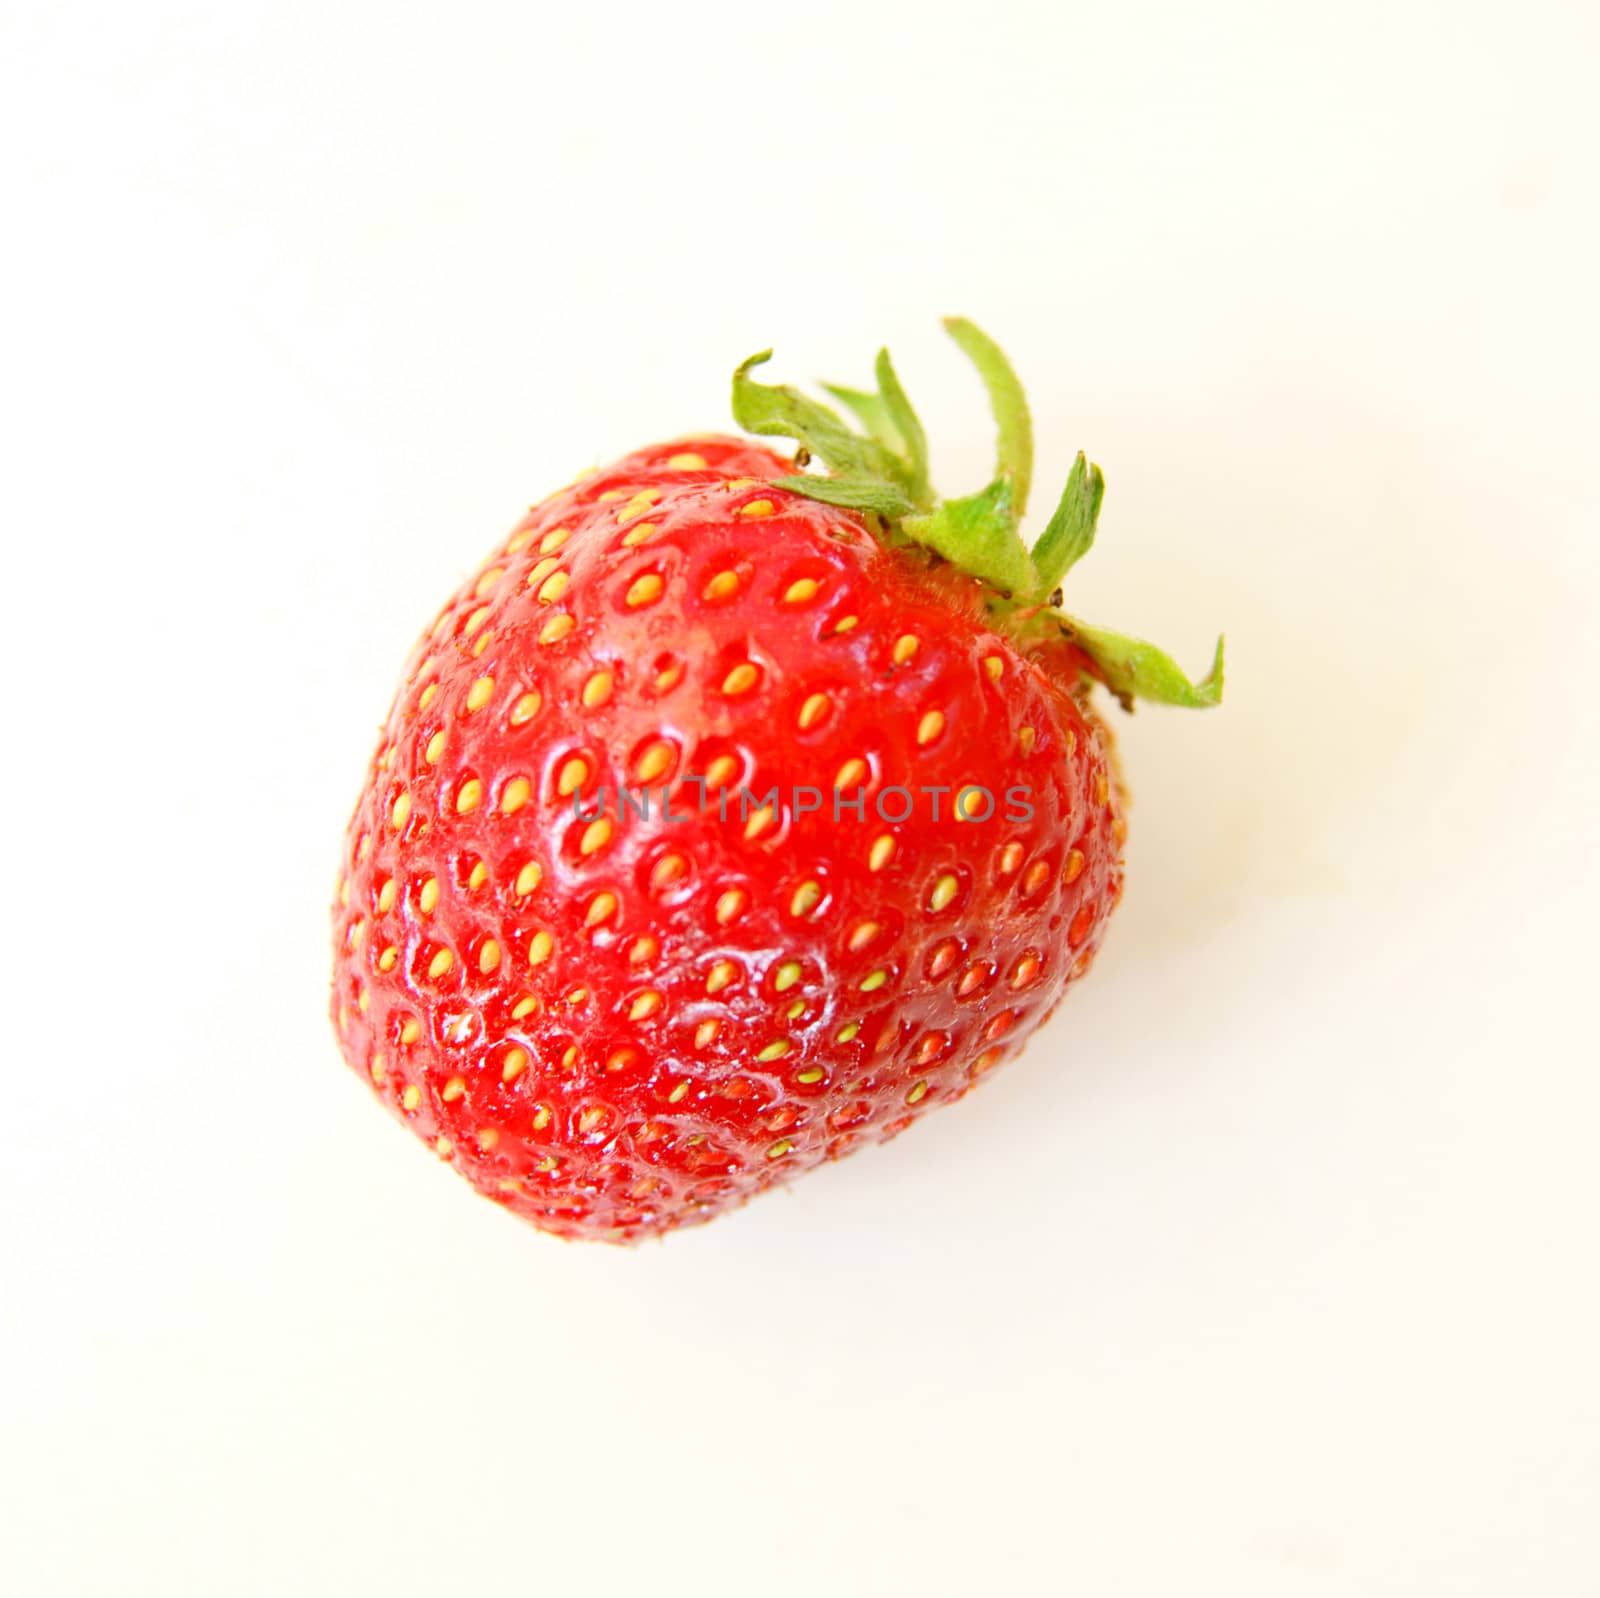 Berry of the strawberry on white by cobol1964